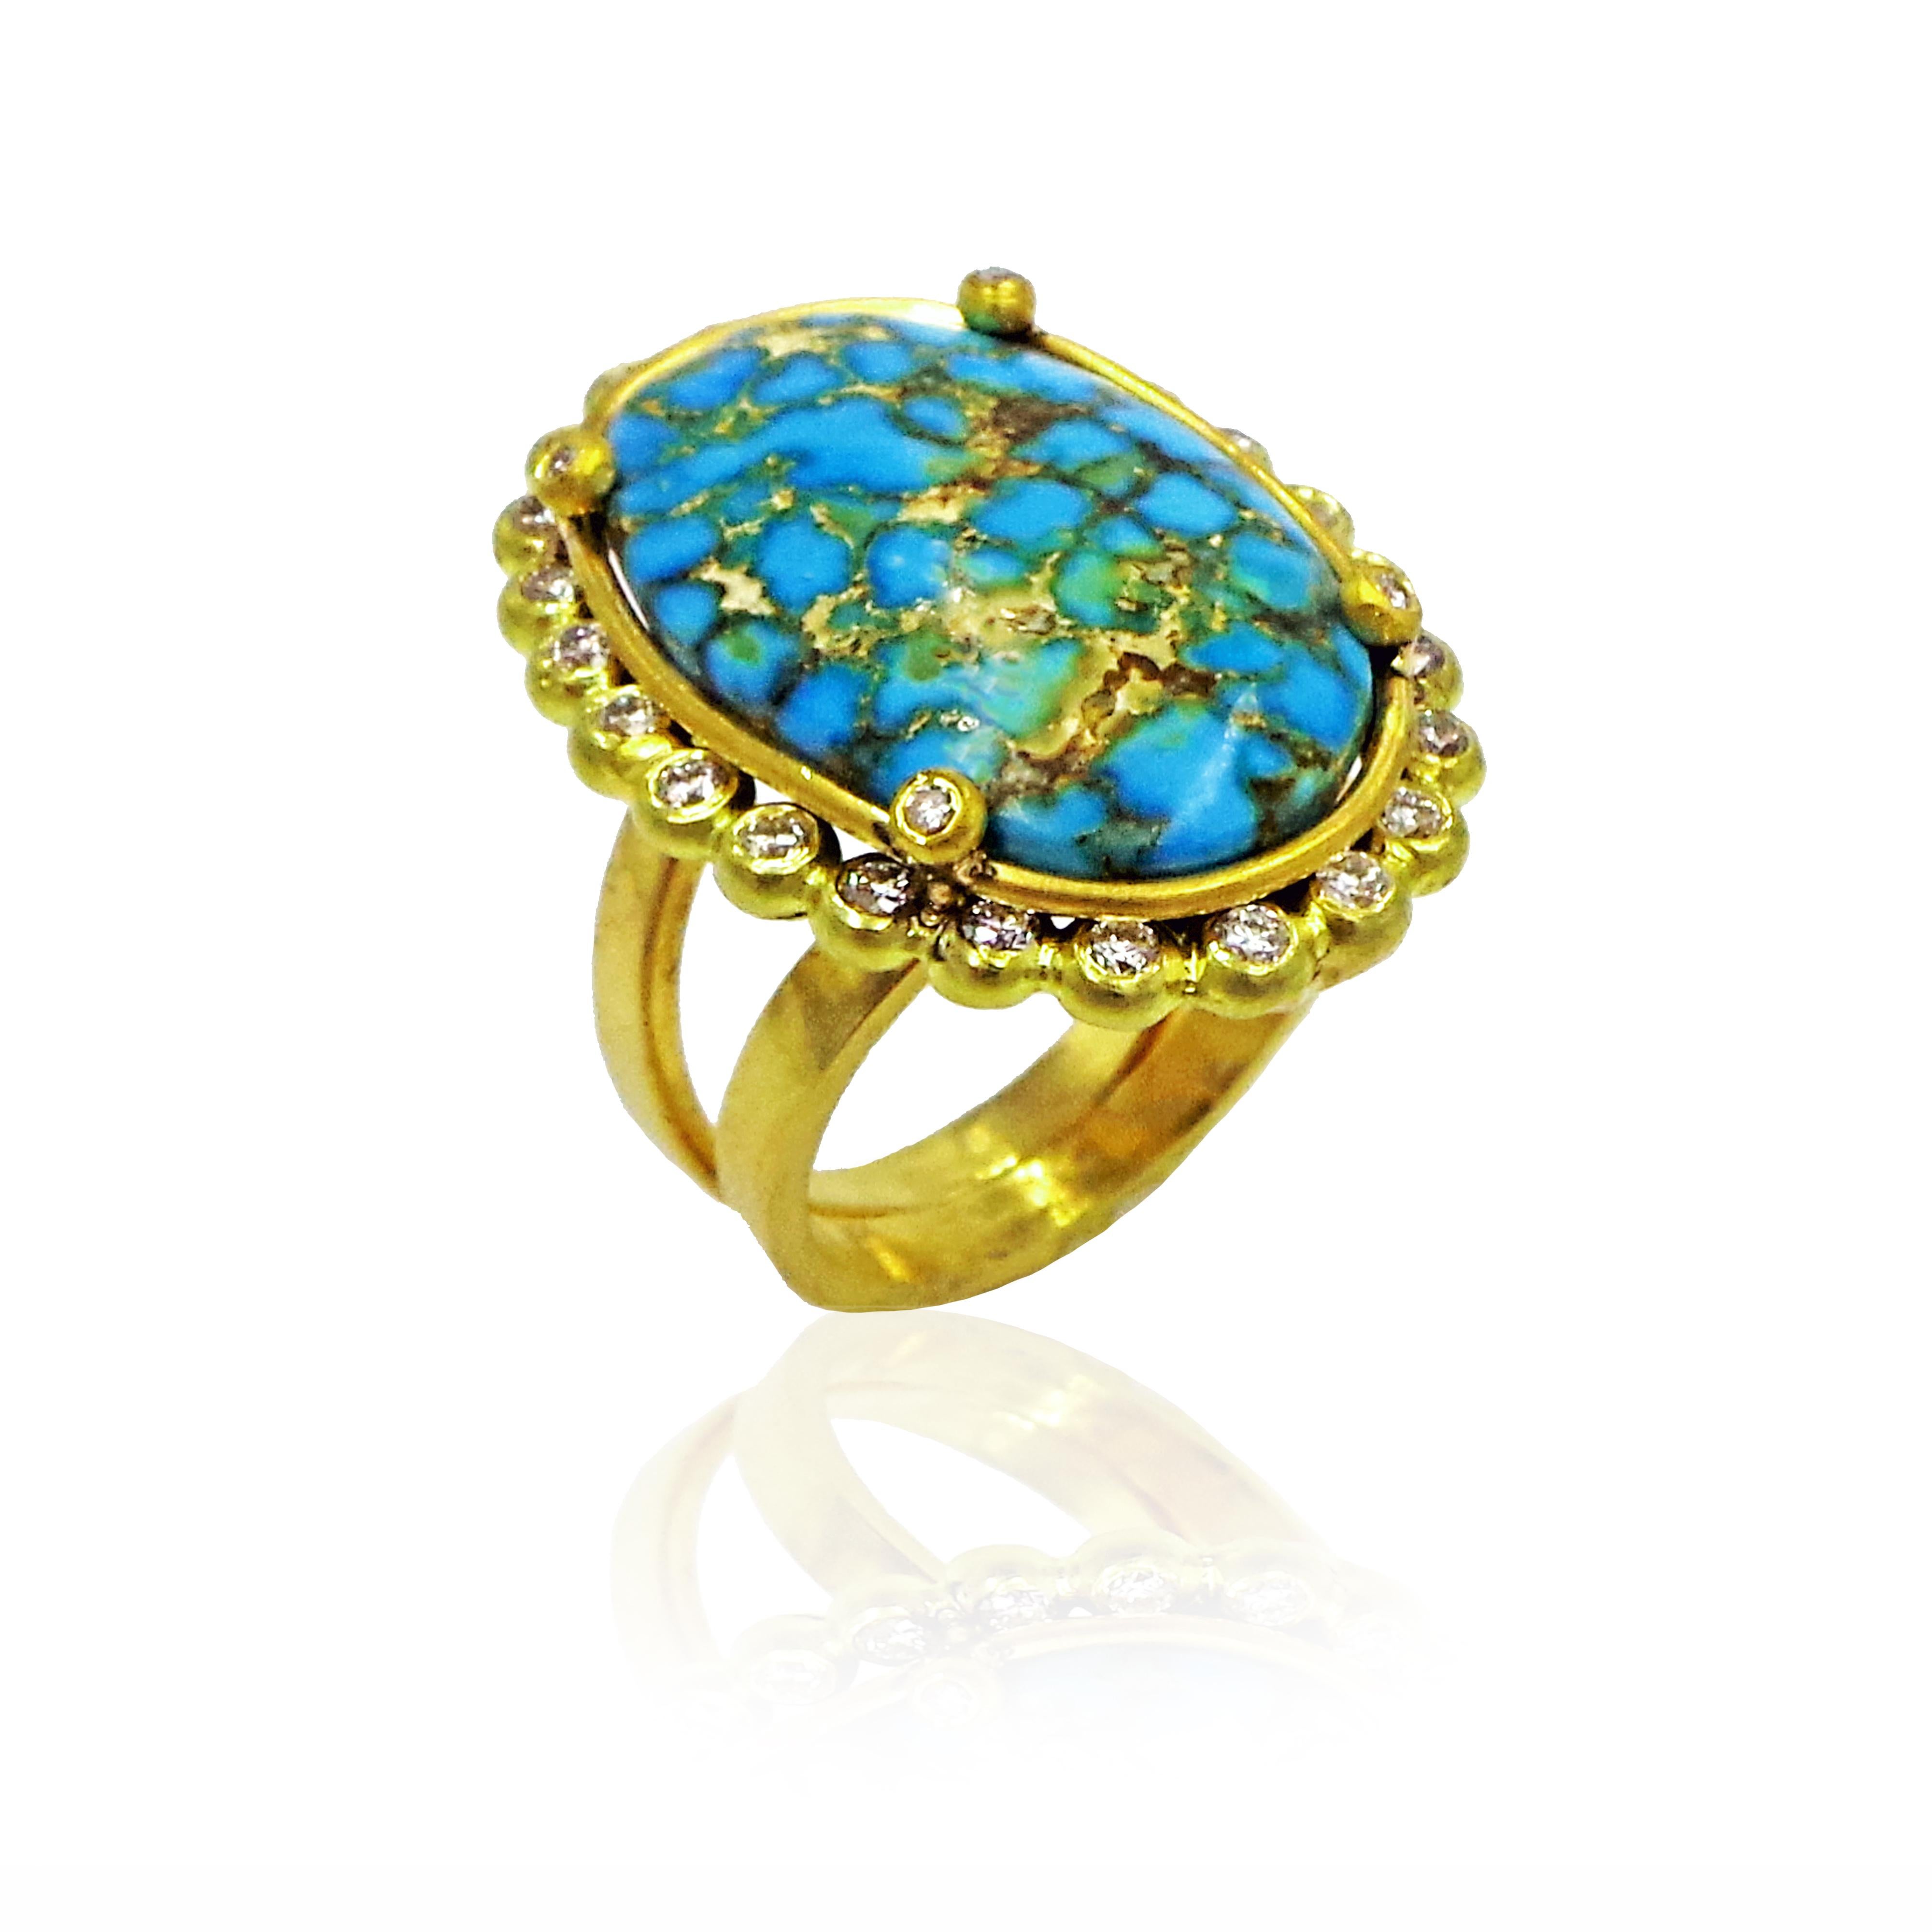 Beautiful, gem grade 17.5 carat Turquoise Mountain turquoise gemstone (Arizona, USA) surrounded with Diamond halo and prongs (0.54 carat total weight, SI1 clarity, G-H color). Ring setting is hand-forged 22k yellow gold, weighing 9.85 grams. Size